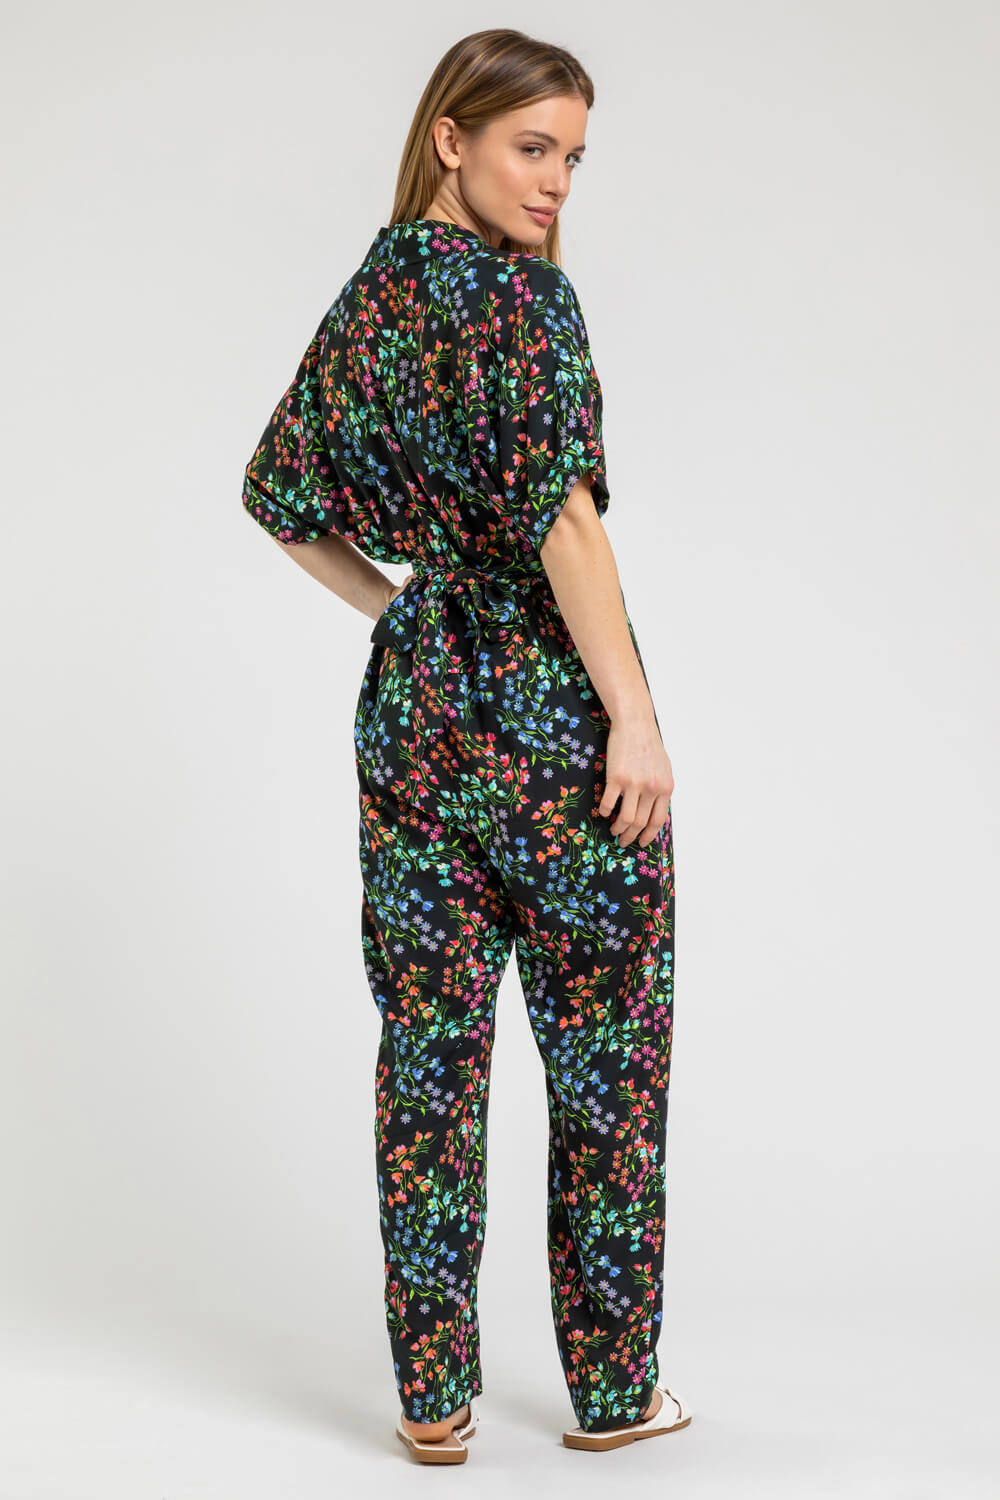 Black Petite Ditsy Floral Collar Jumpsuit, Image 2 of 5